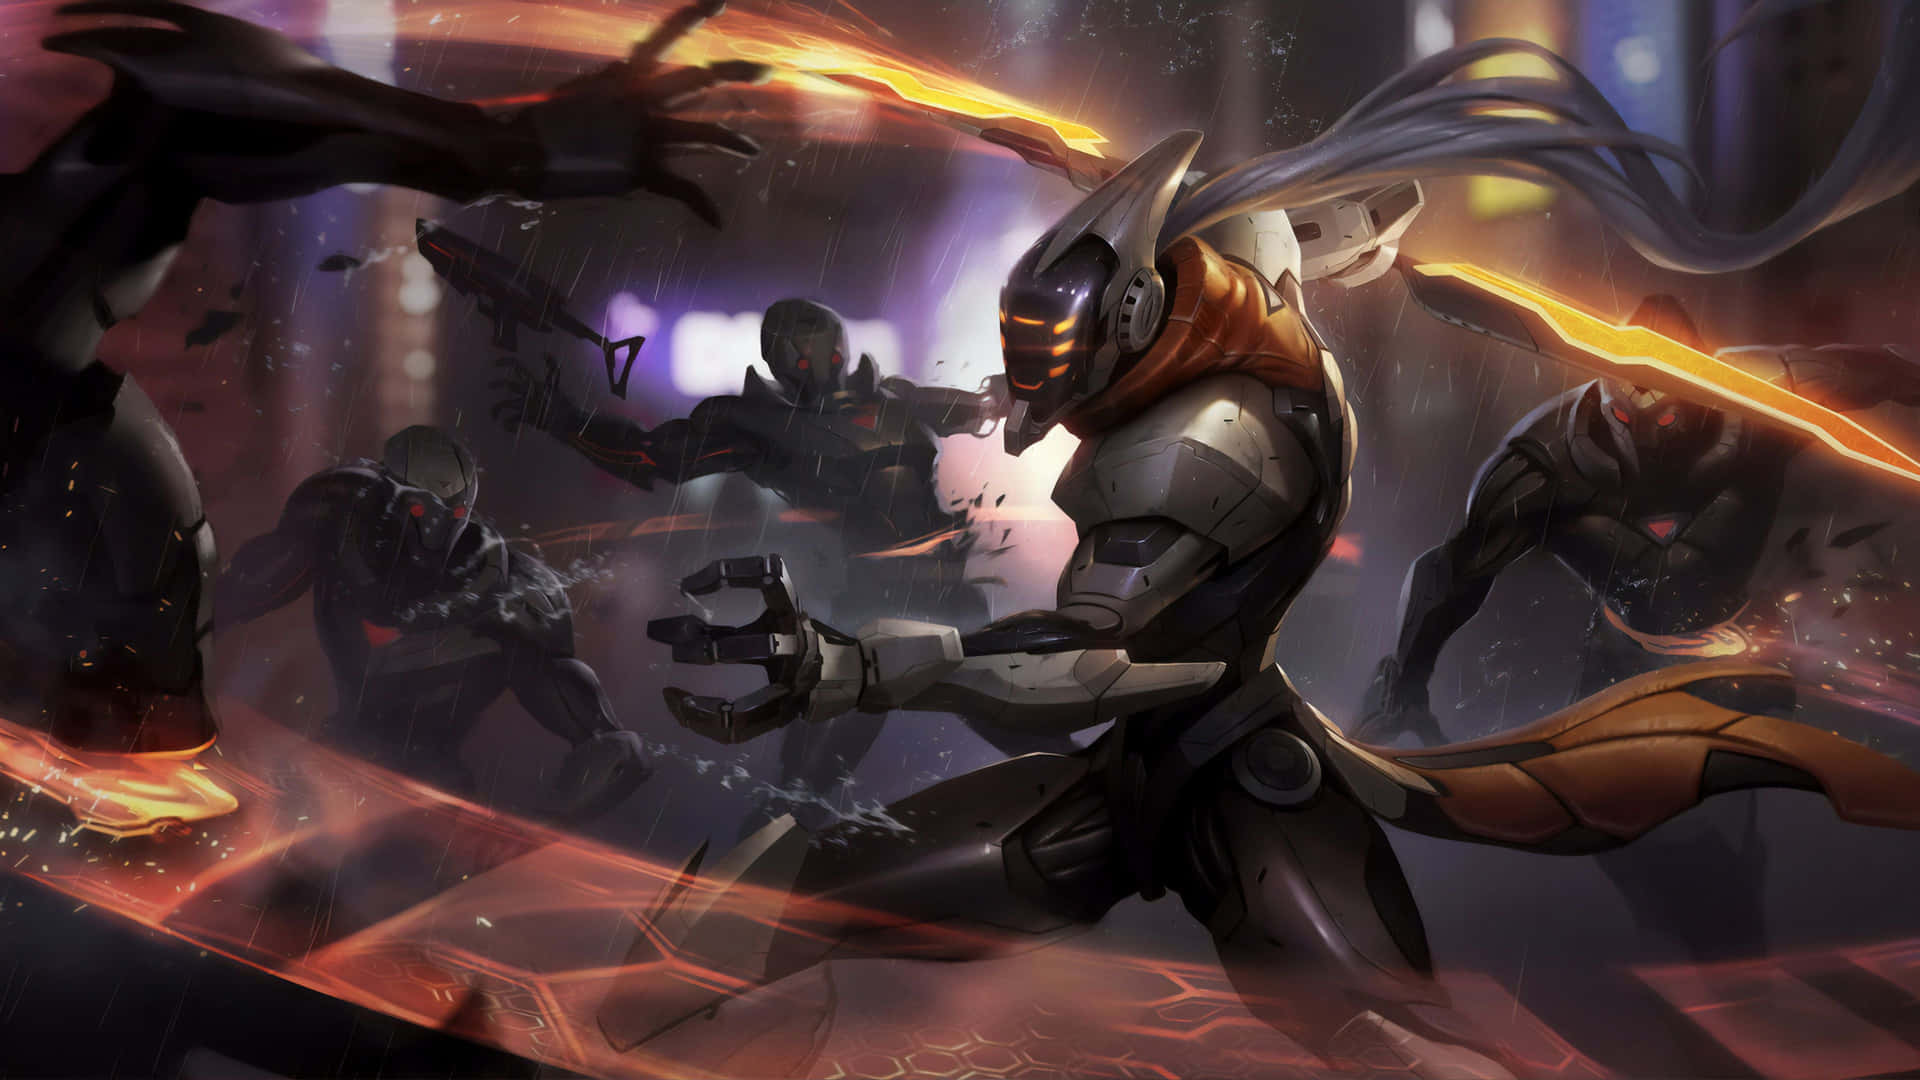 The epic world of Tyria awaits in League of Legends HD Wallpaper